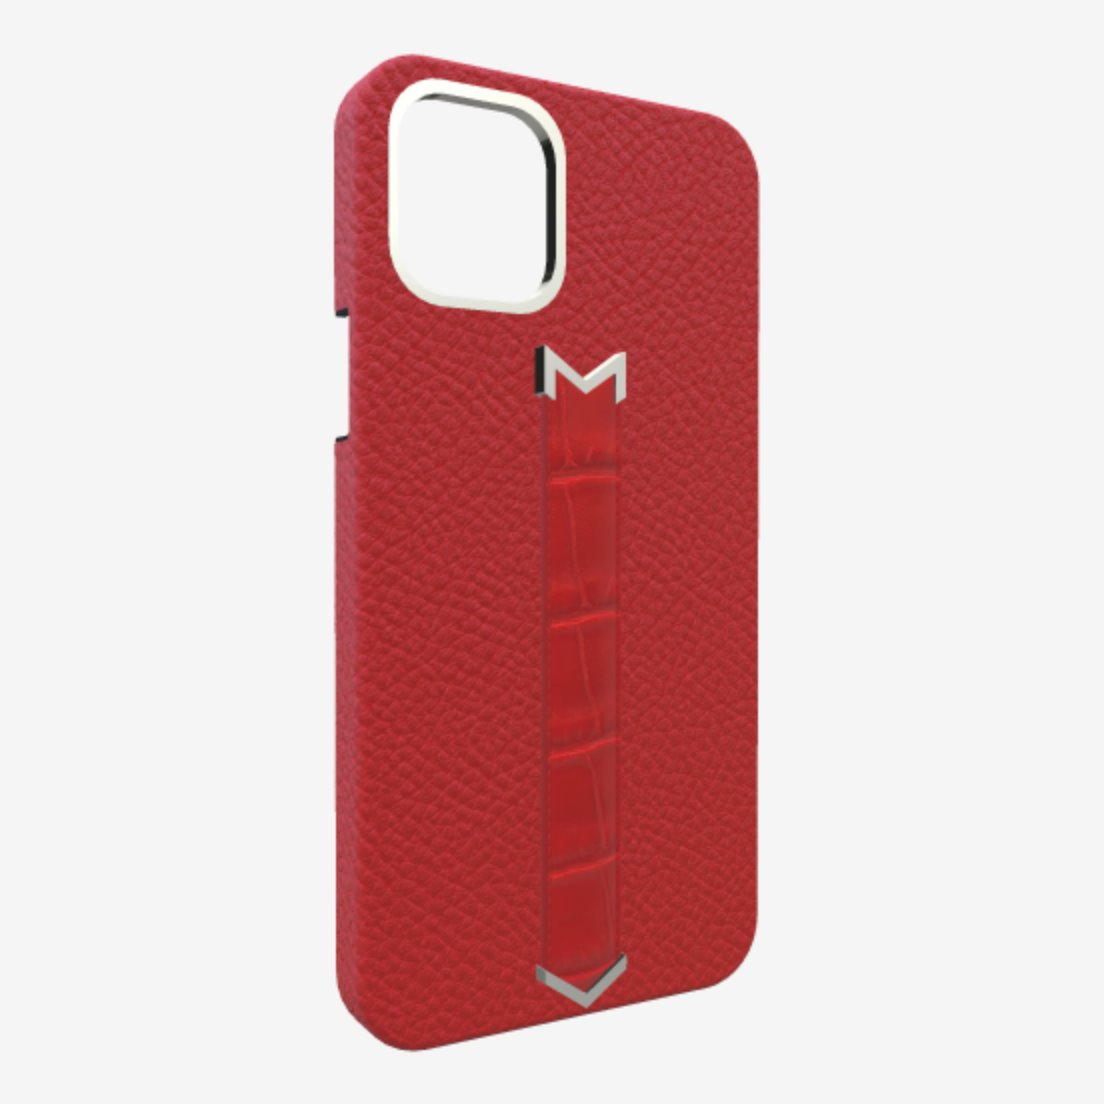 Silver Finger Strap Case for iPhone 13 Pro Max in Genuine Calfskin and Alligator Glamour-Red Glamour-Red 